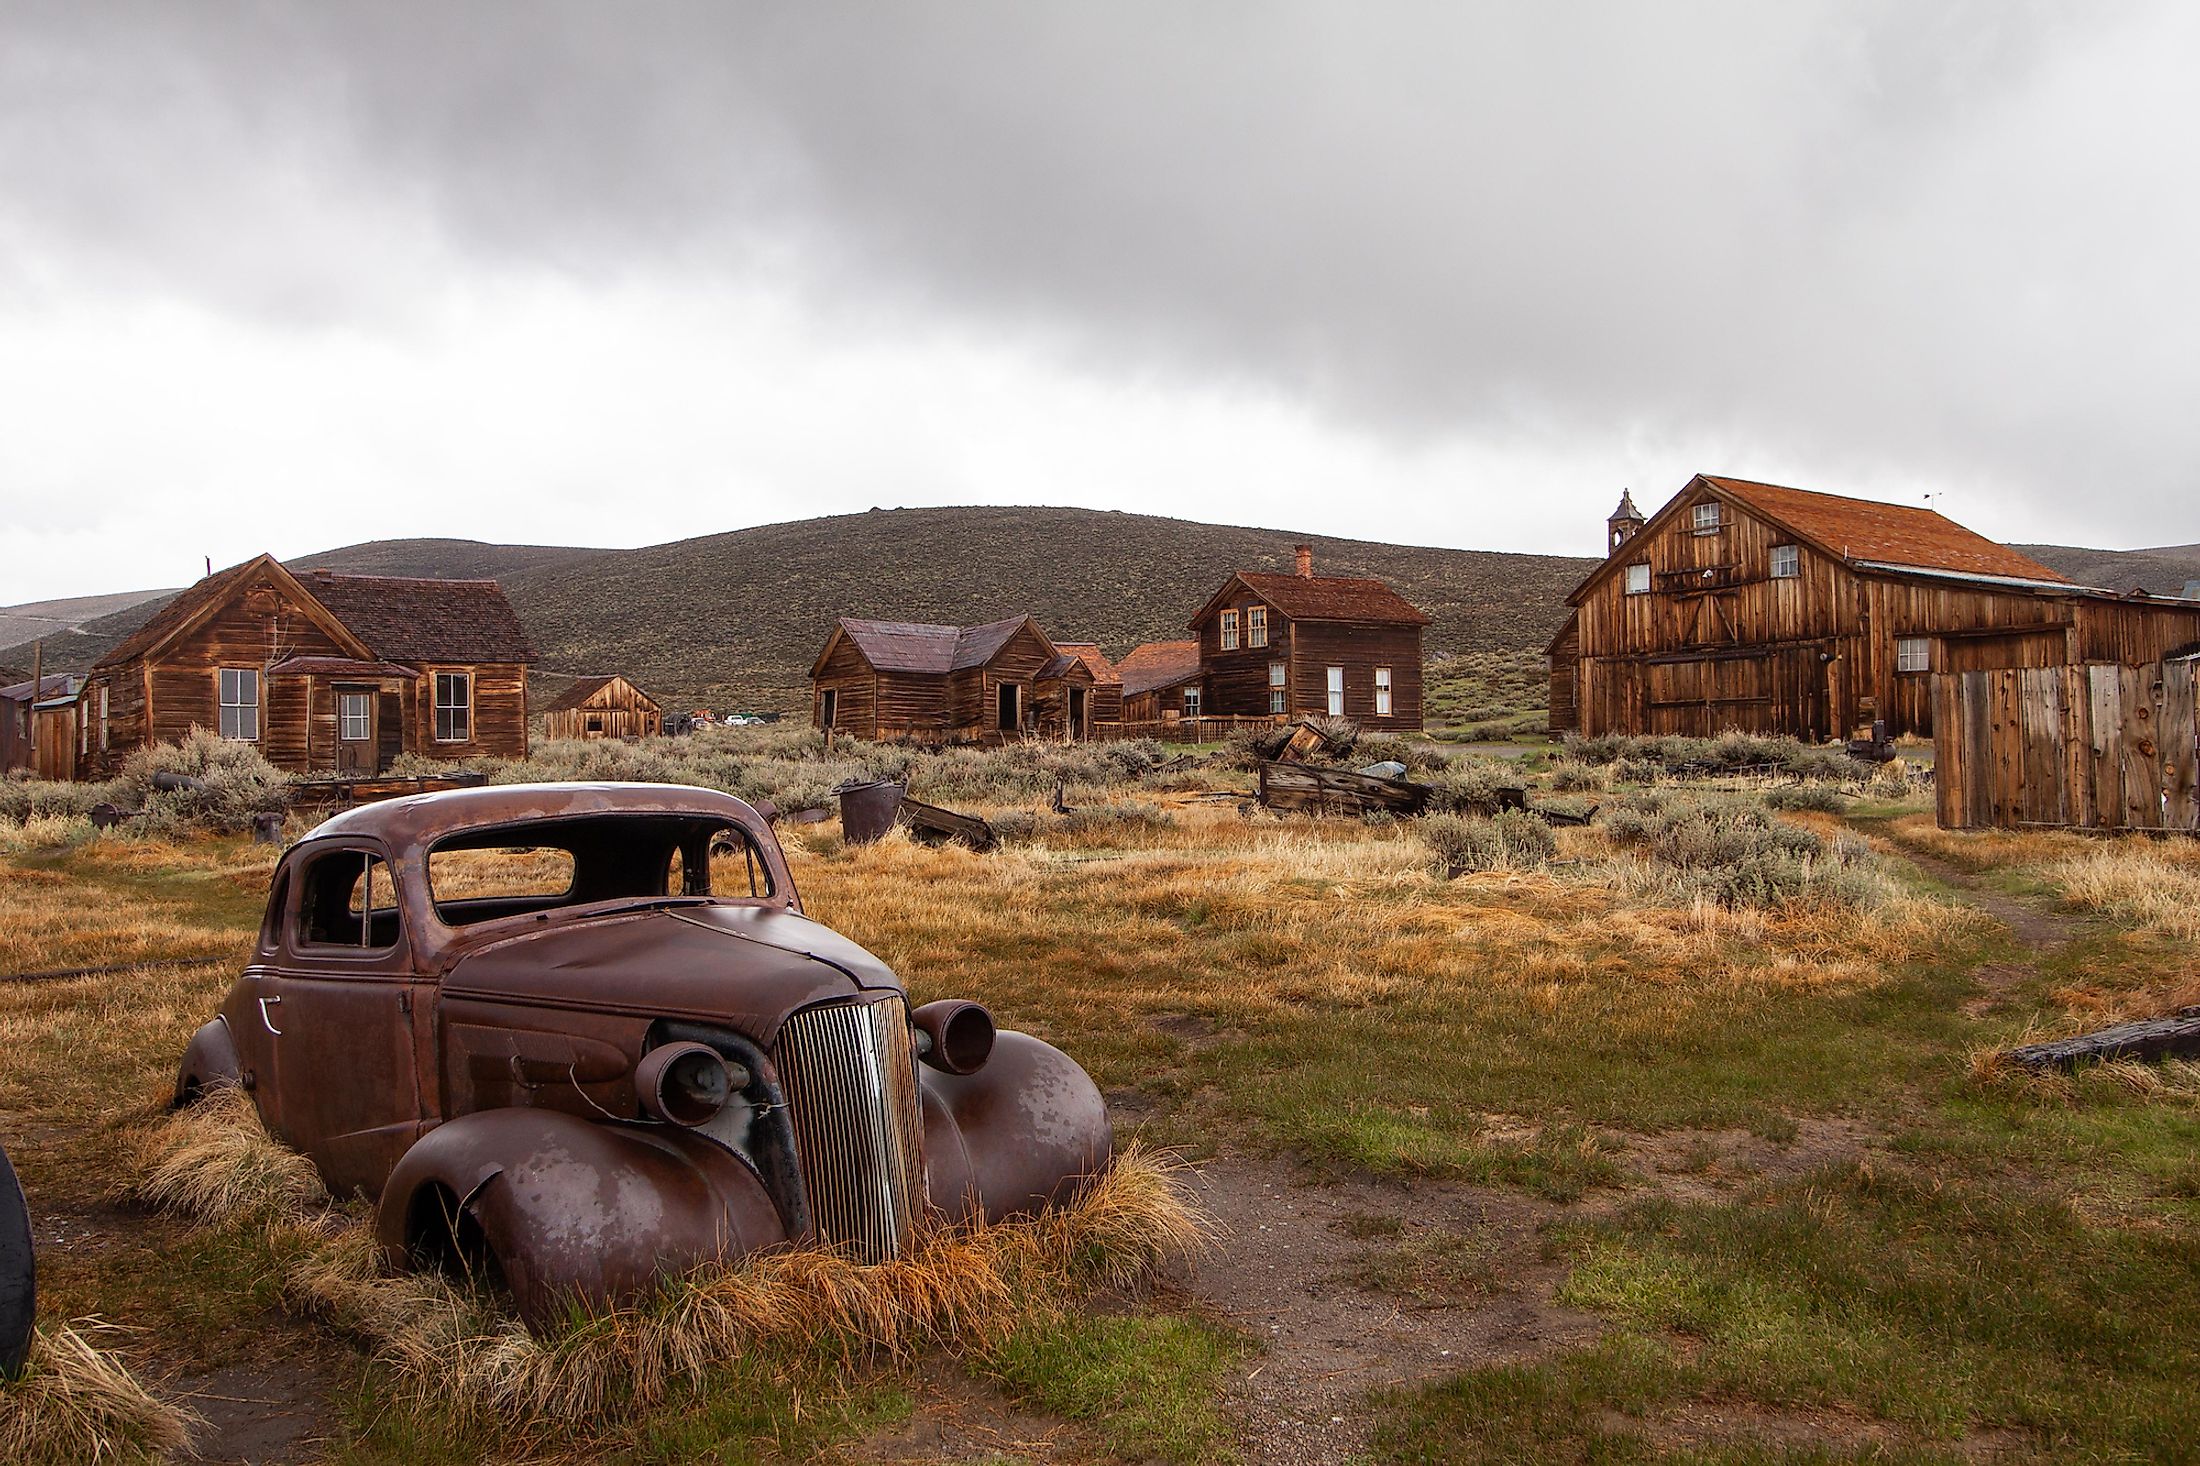 Bodie is a ghost town in the Bodie Hills, east of Sierra Nevada mountain range in Mono County, California, United States. 